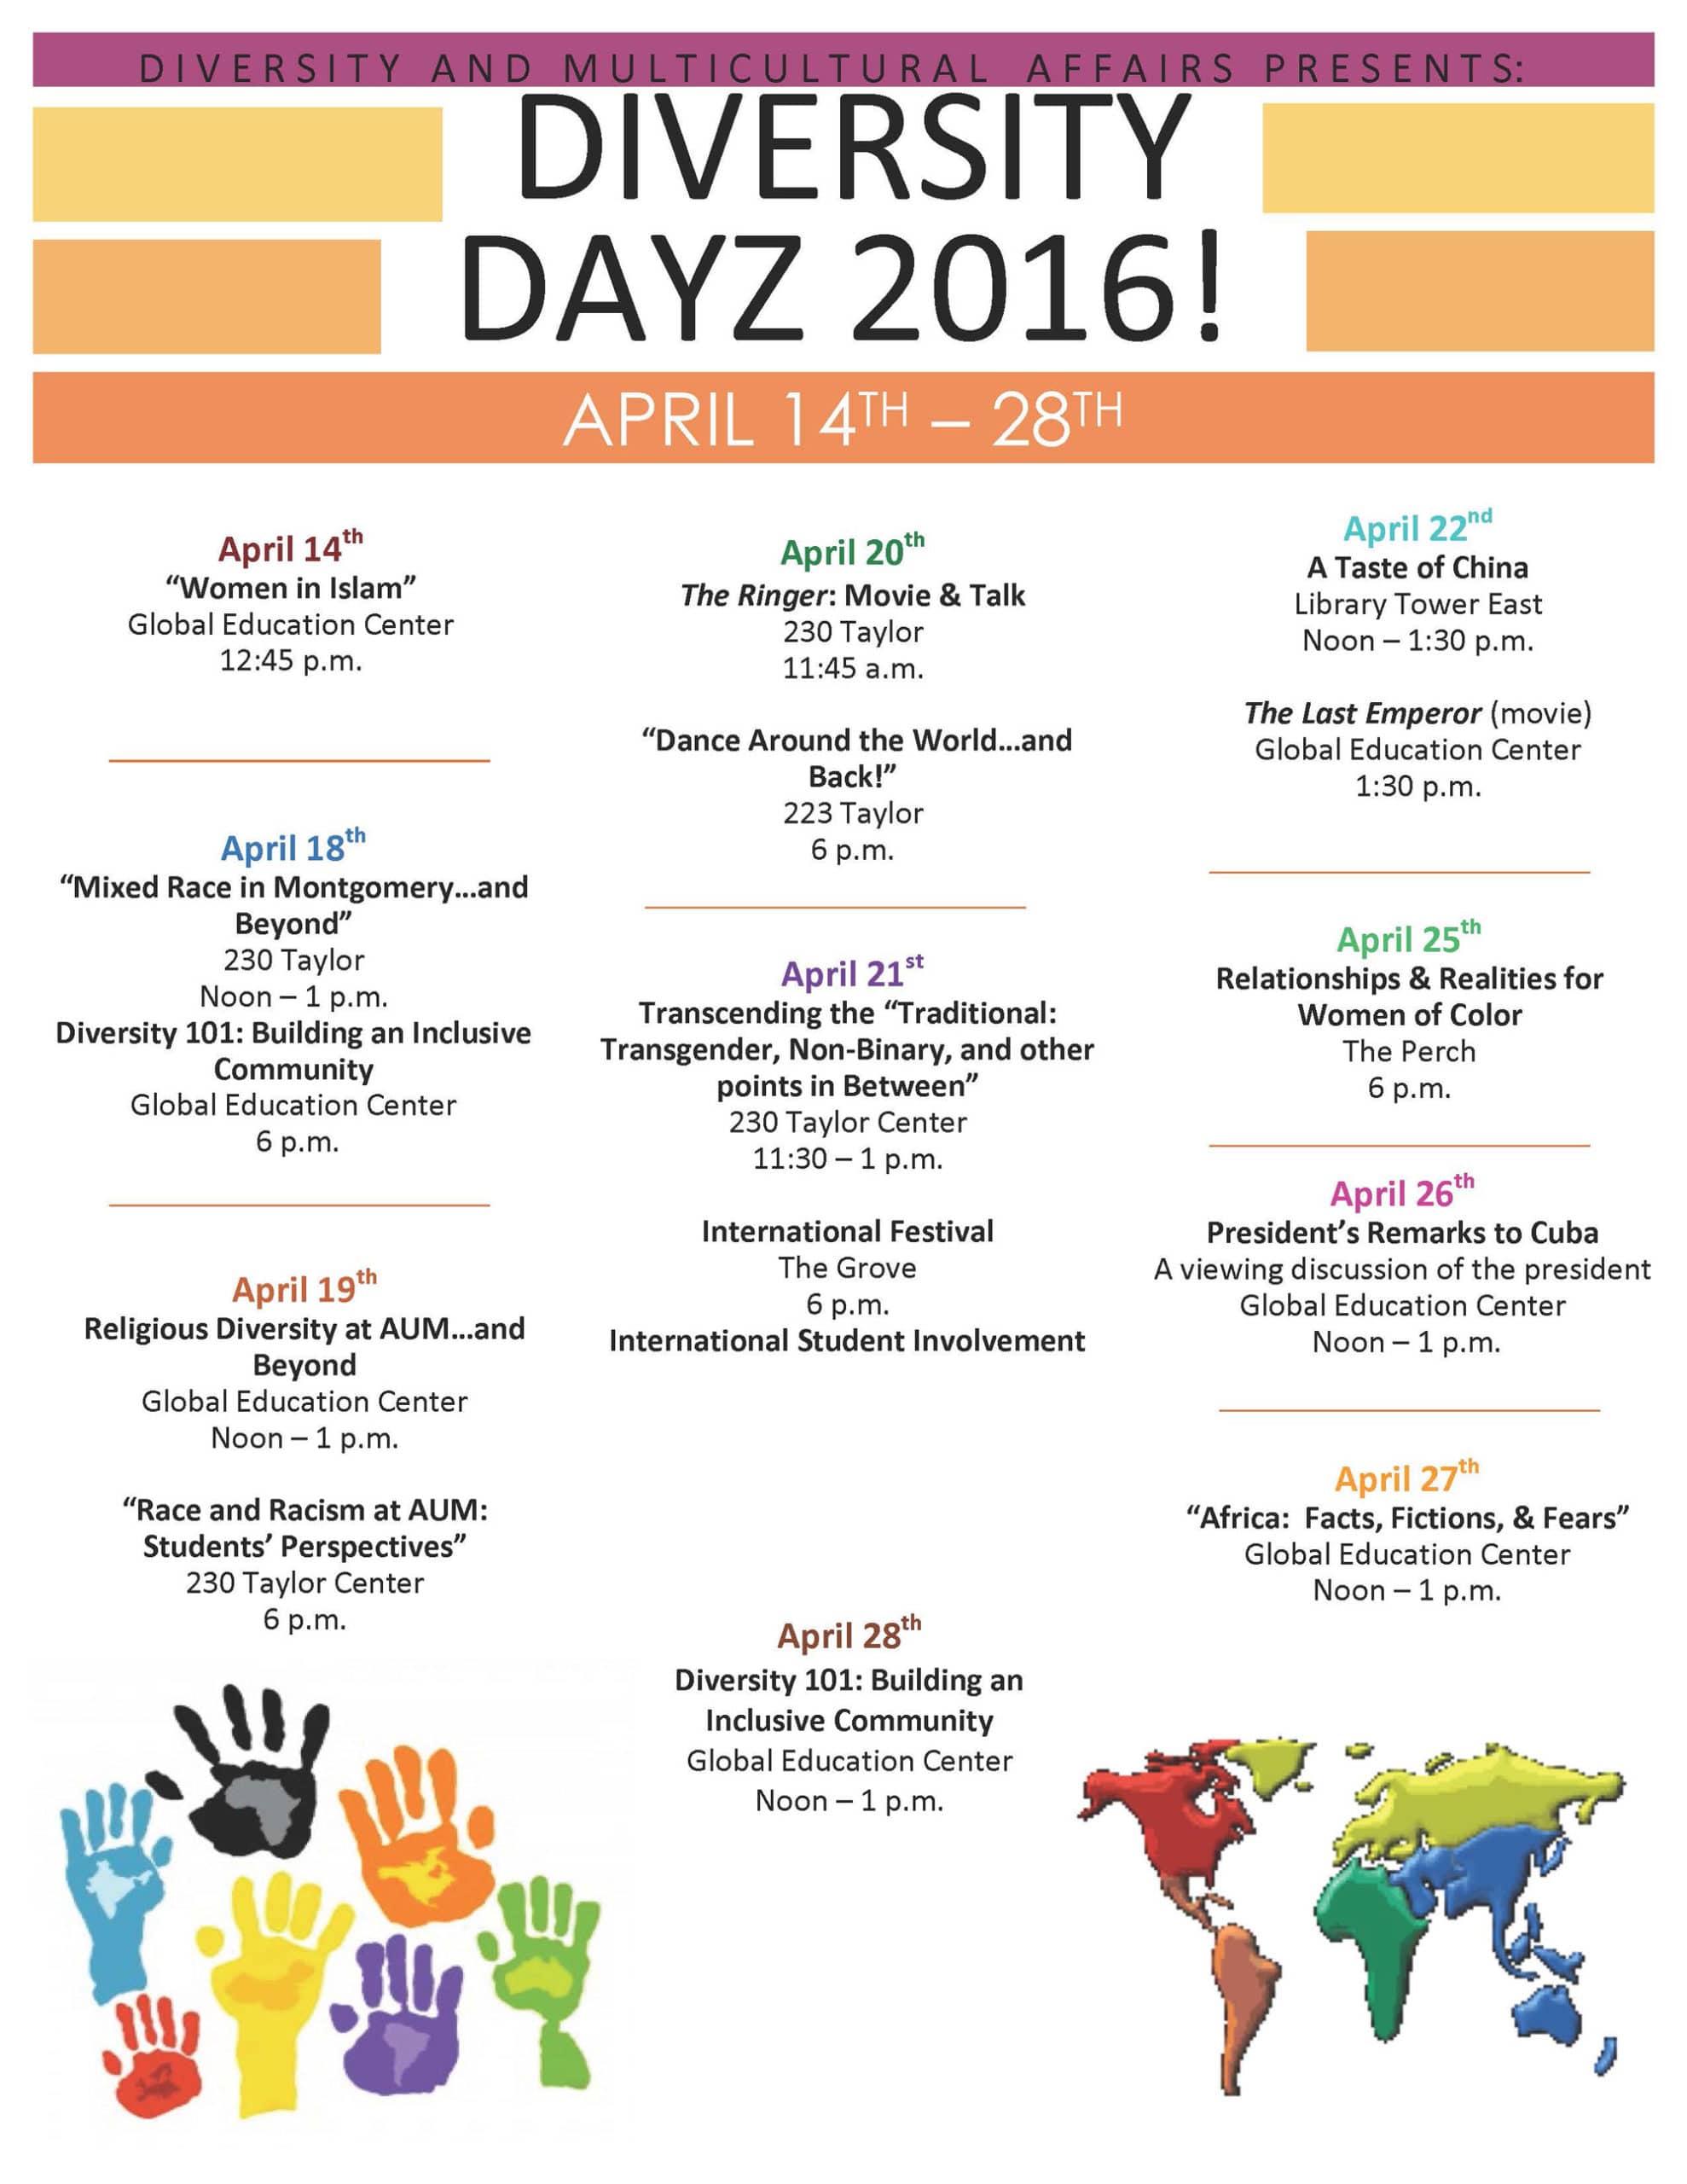 Diversity and Multicultural Affairs presents Diversity Dayz 2016